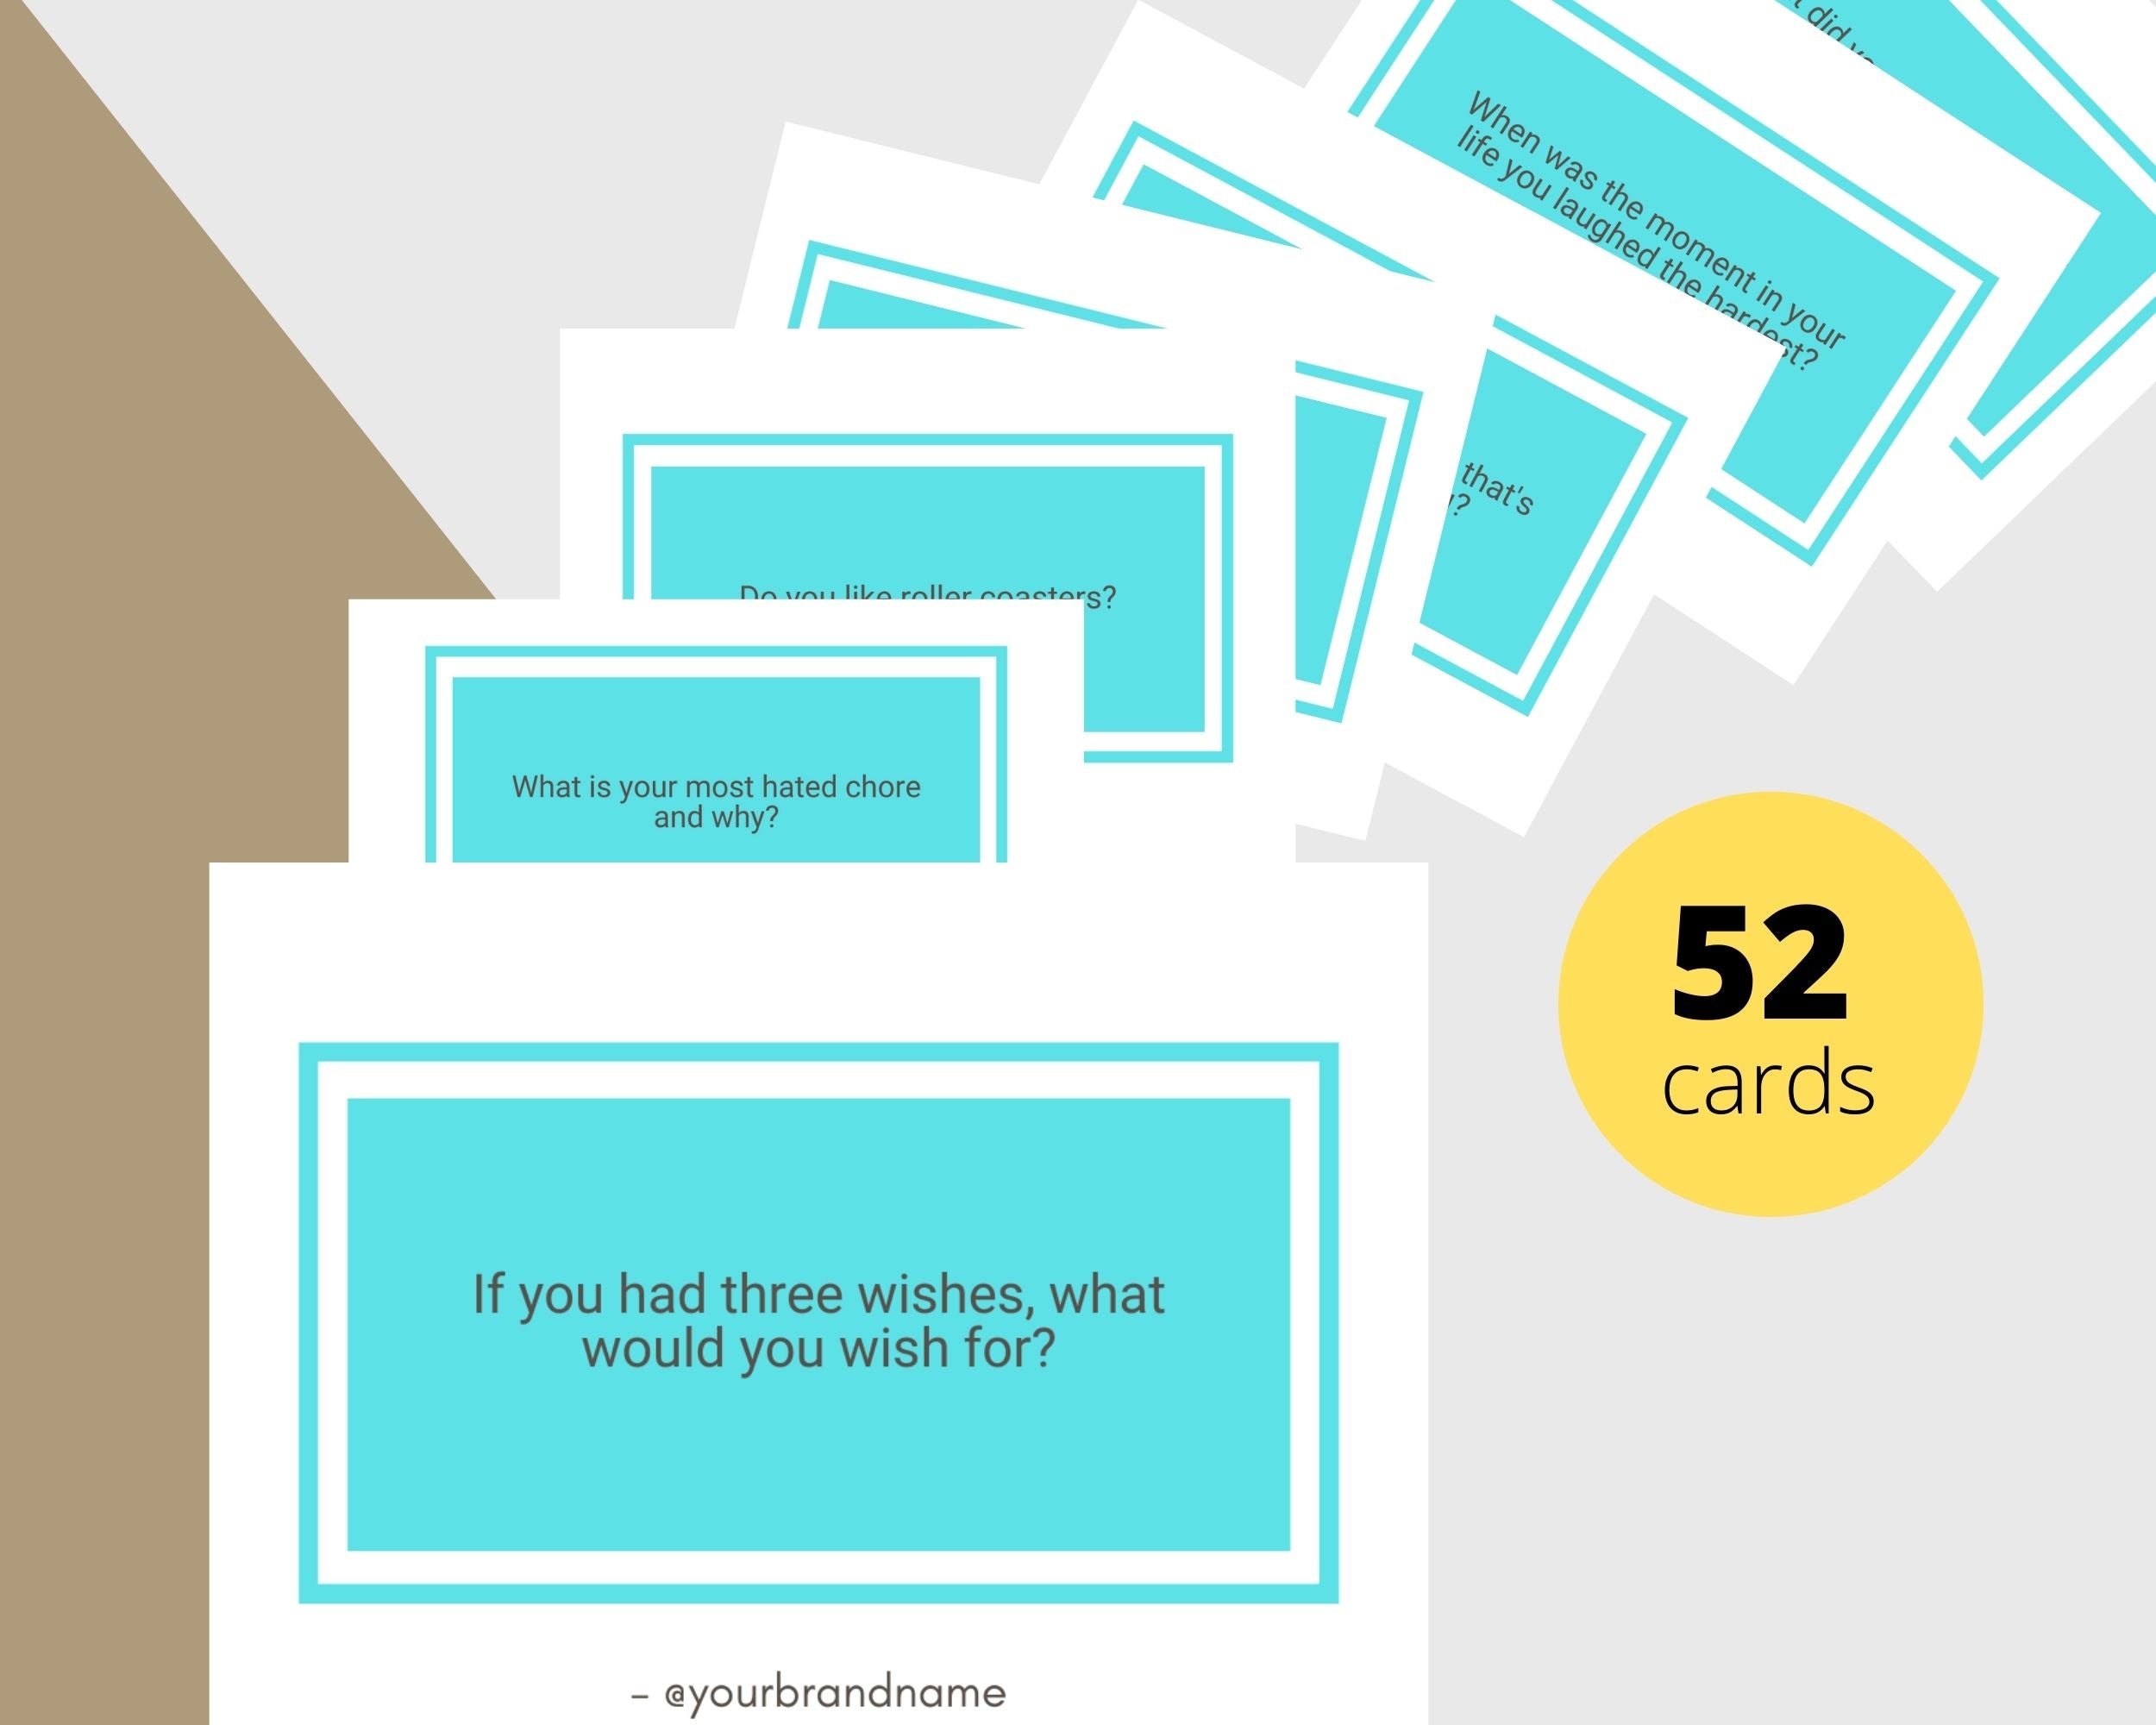 52 Get To Know Your Friends Cards | Canva Inspirational Cards | Commercial Use